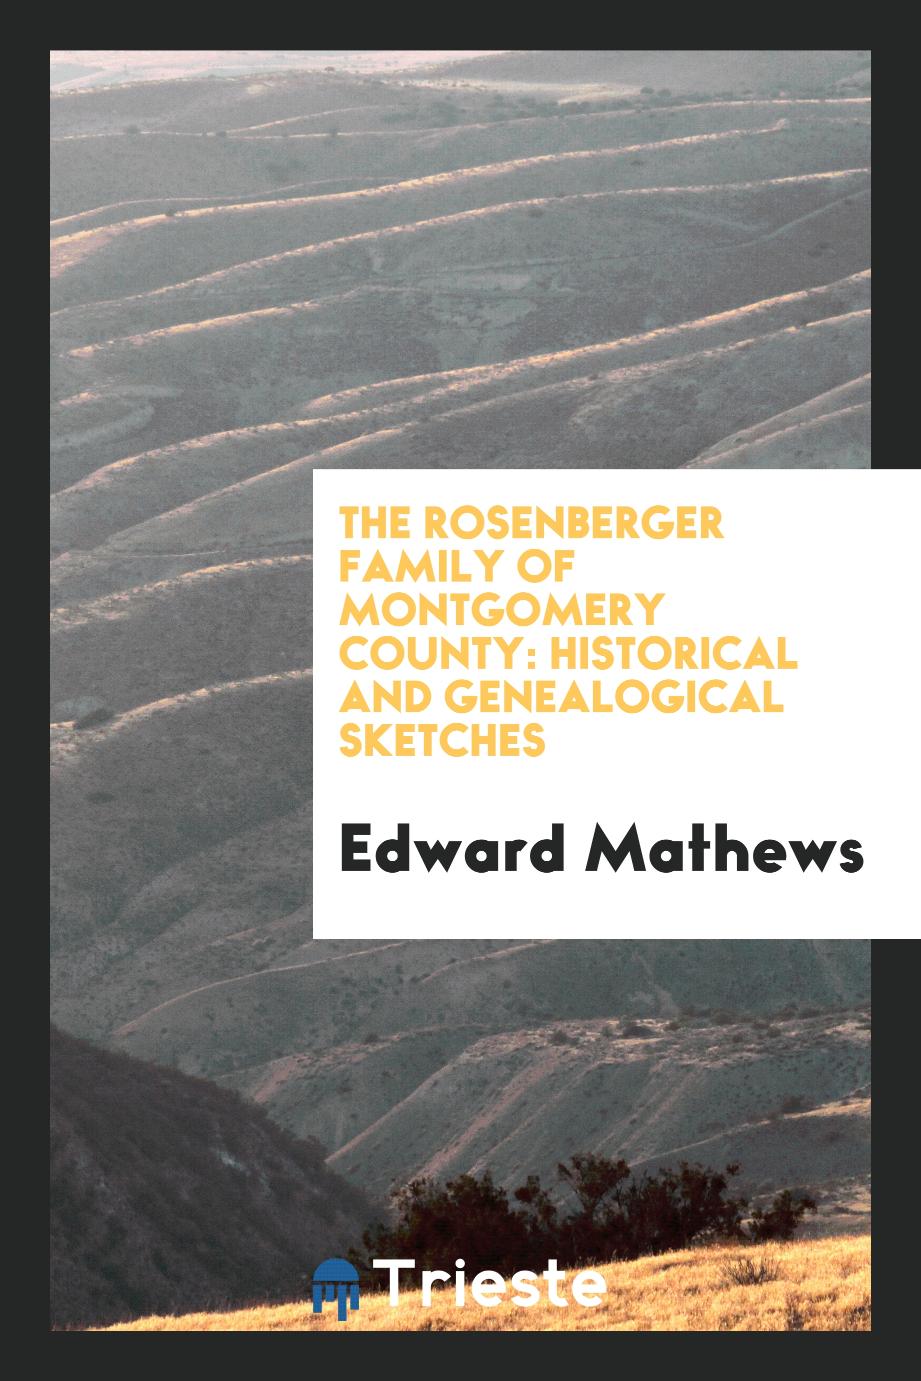 The Rosenberger Family of Montgomery County: Historical and Genealogical sketches